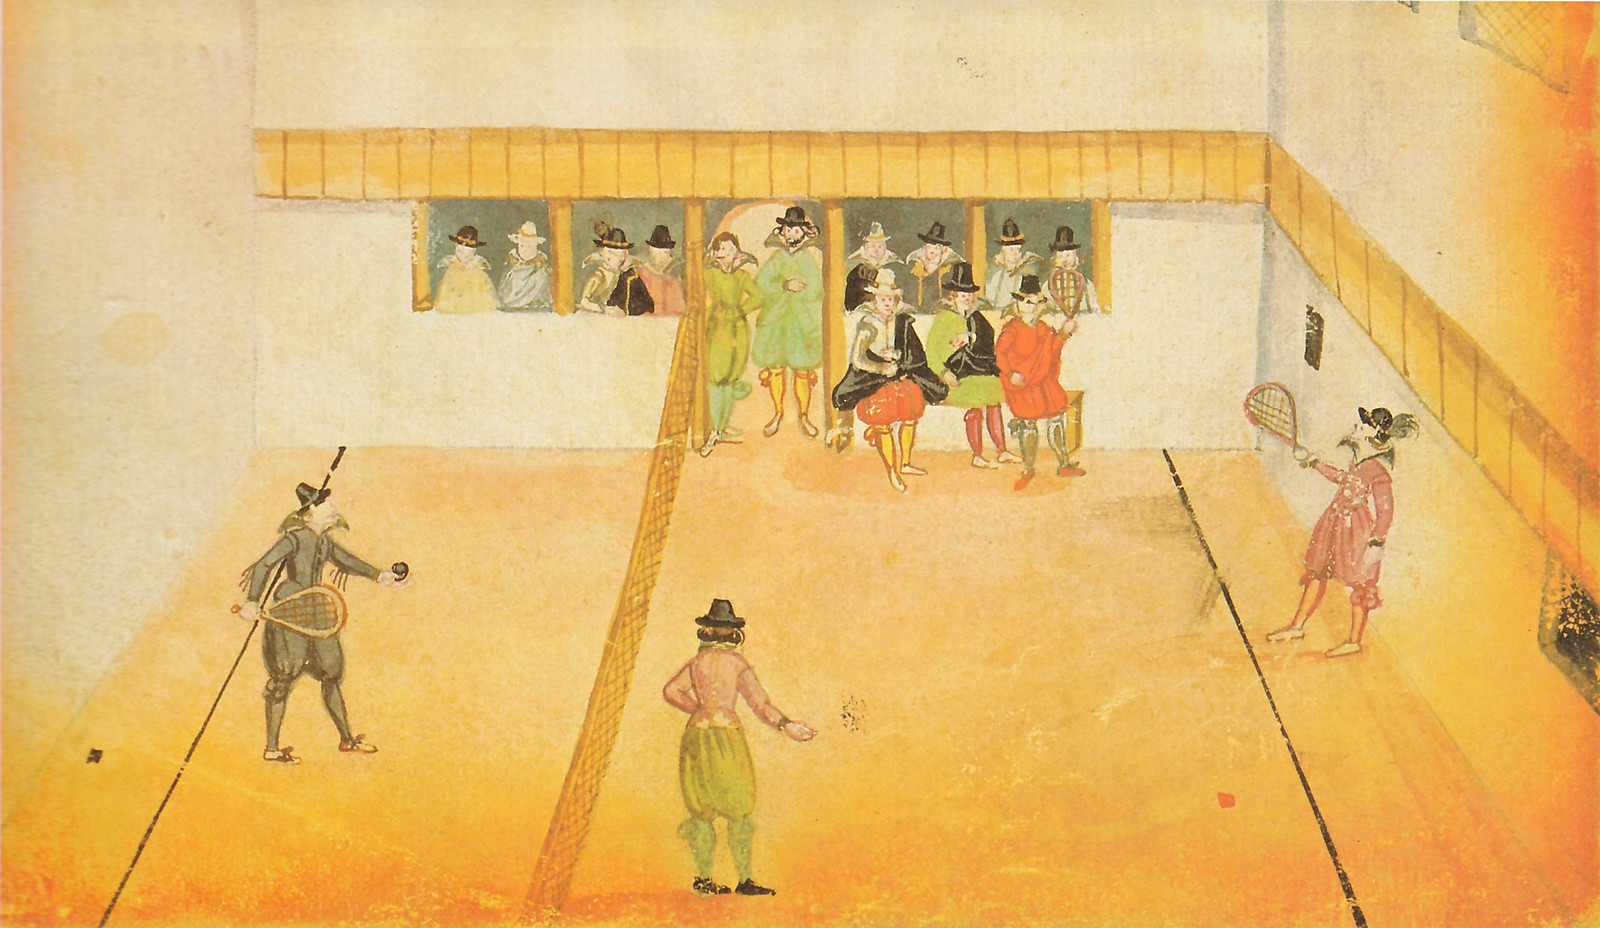 Watercolor painting from an unknown German student who had studied in Italy (Padua or Siena), depicting an early form of Tennis